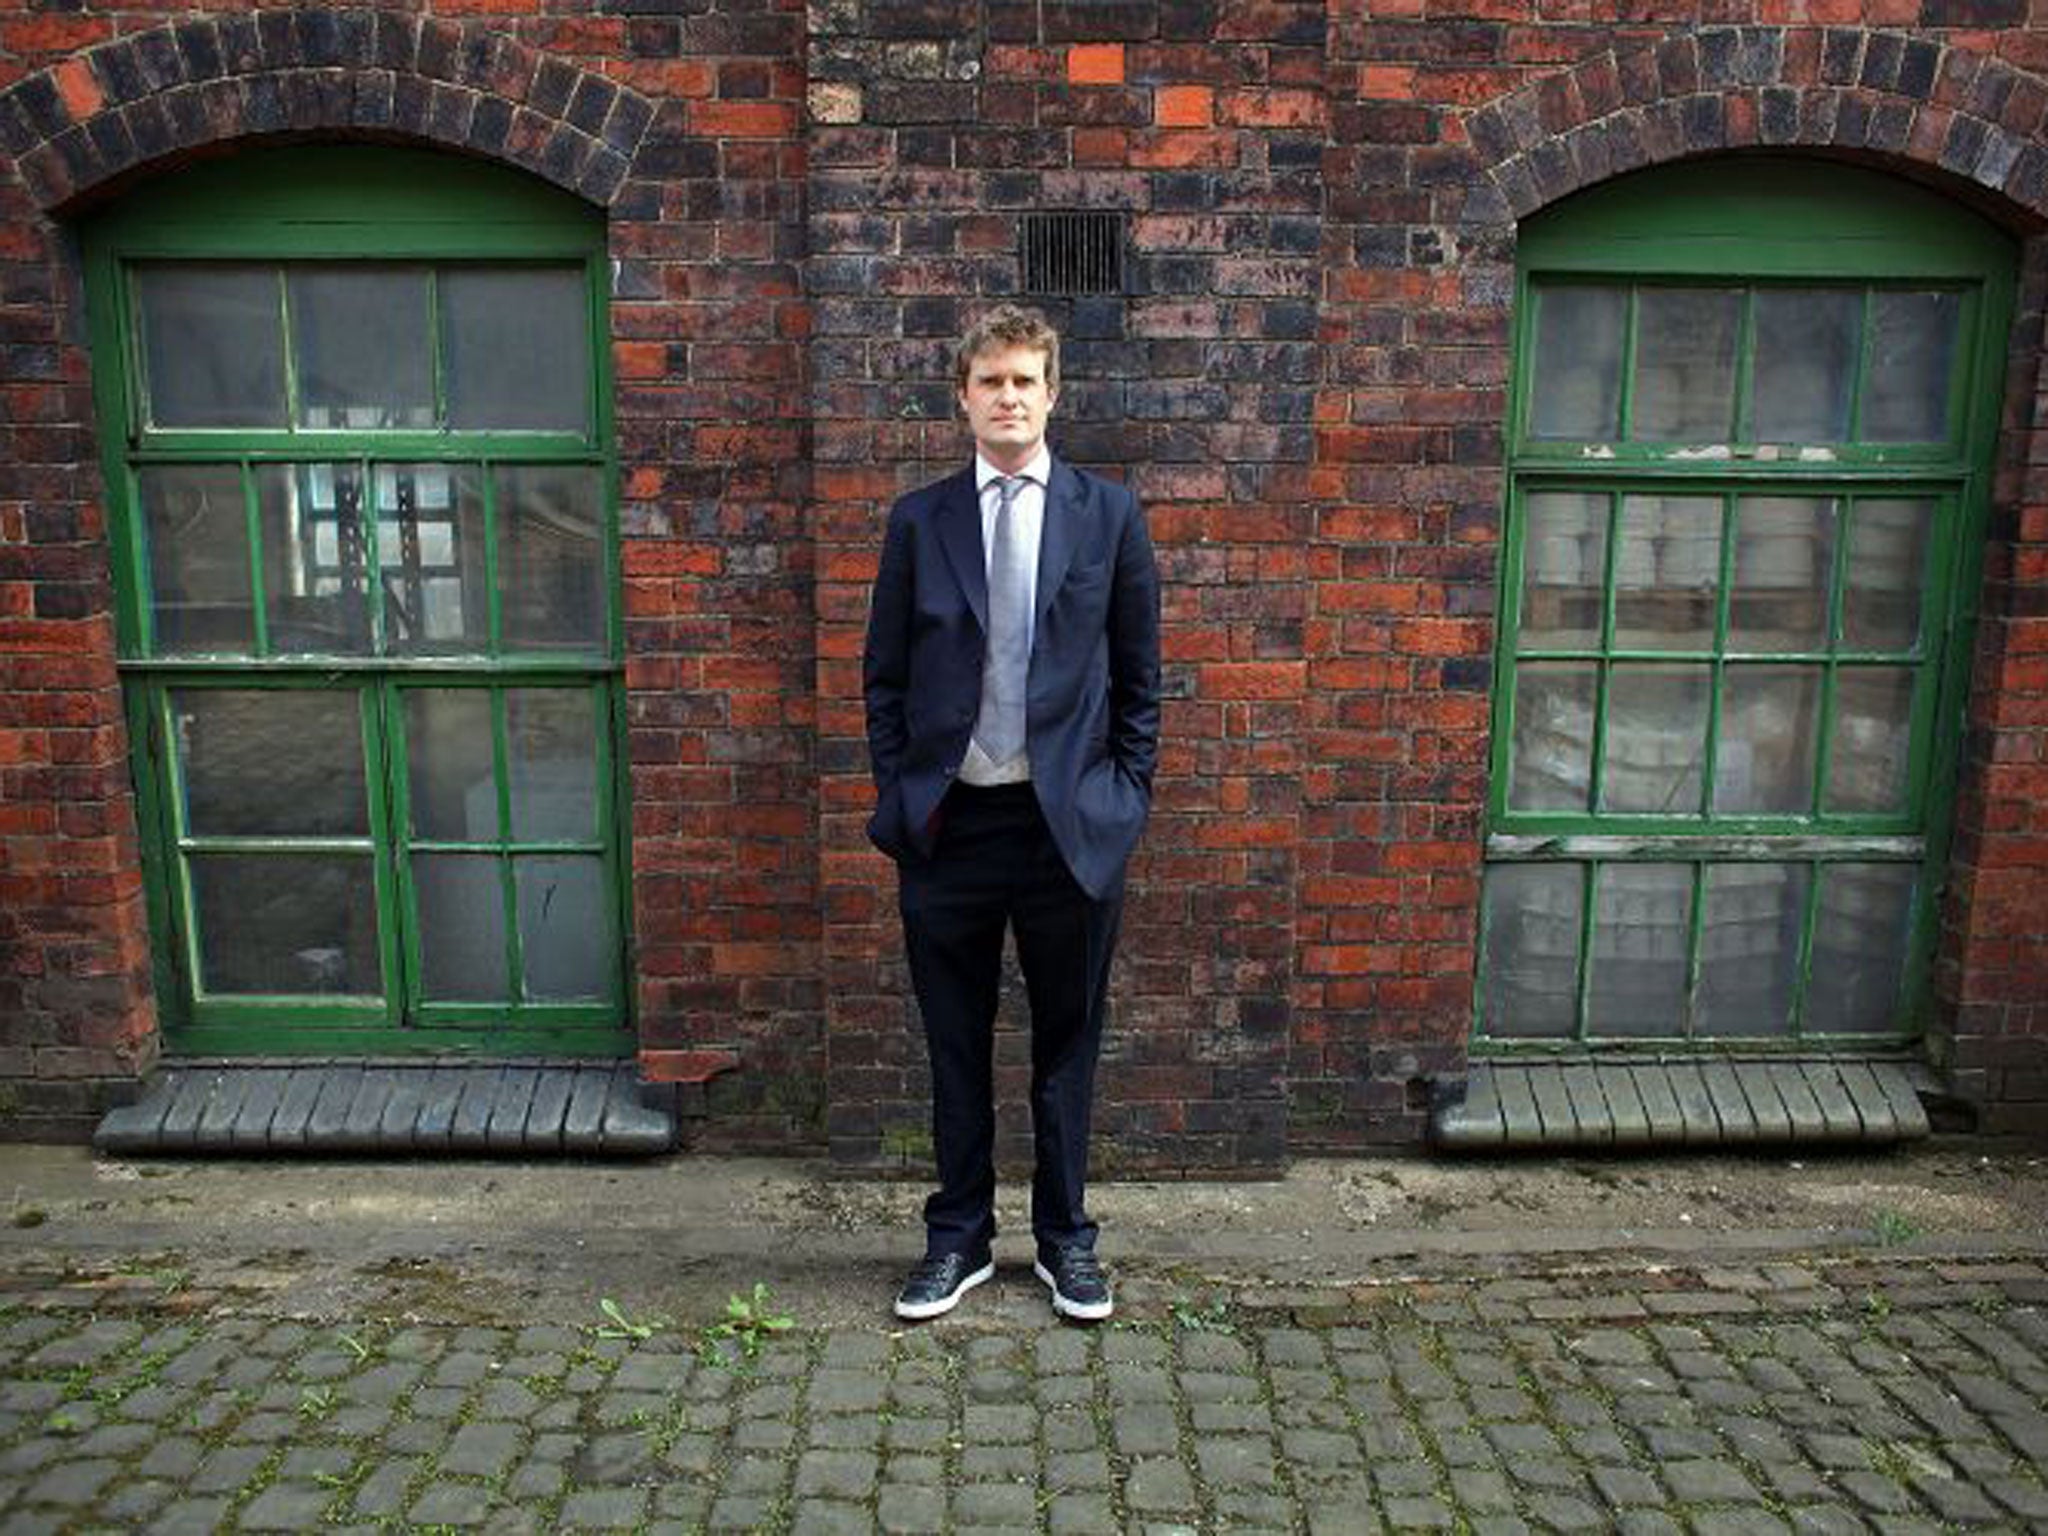 Past life: Tristram Hunt, the shadow Education Secretary, and author of ‘Ten Cities that Made an Empire’